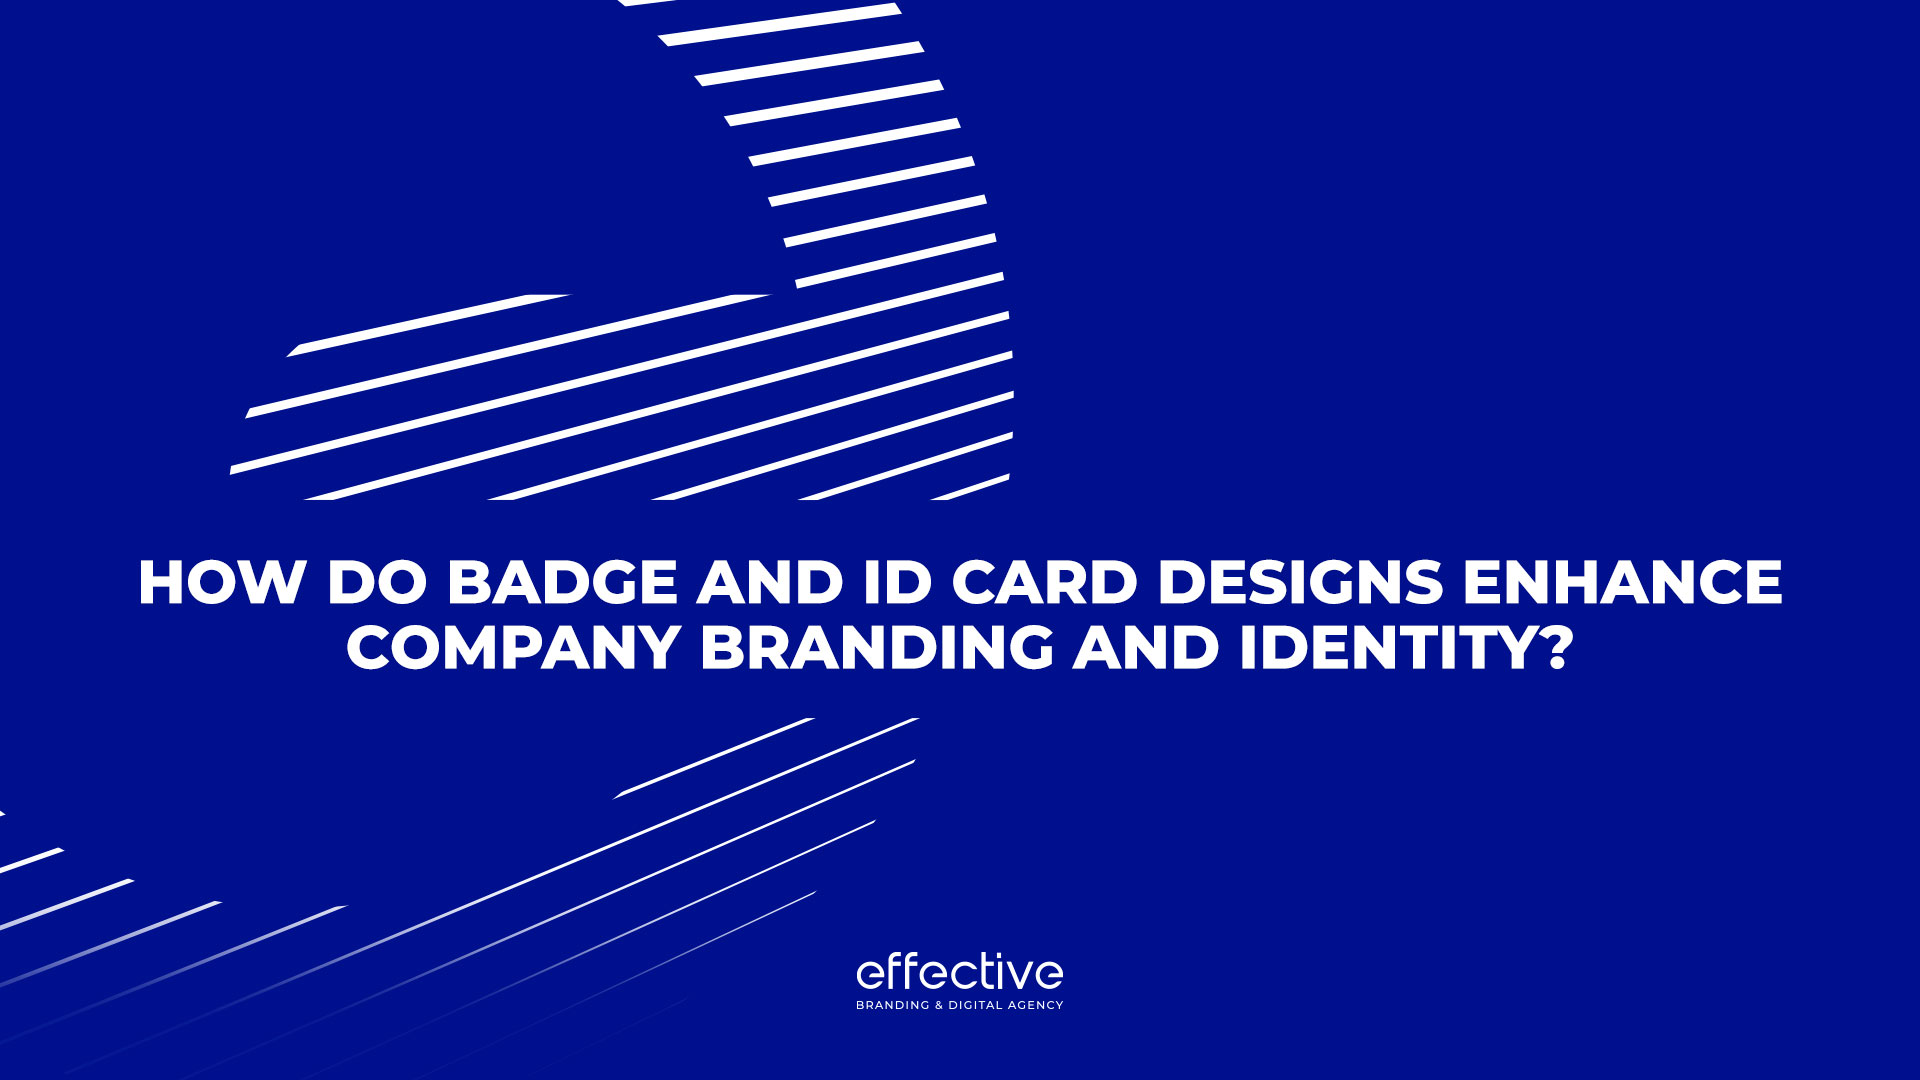 How Do Badge and ID Card Designs Enhance Company Branding and Identity?